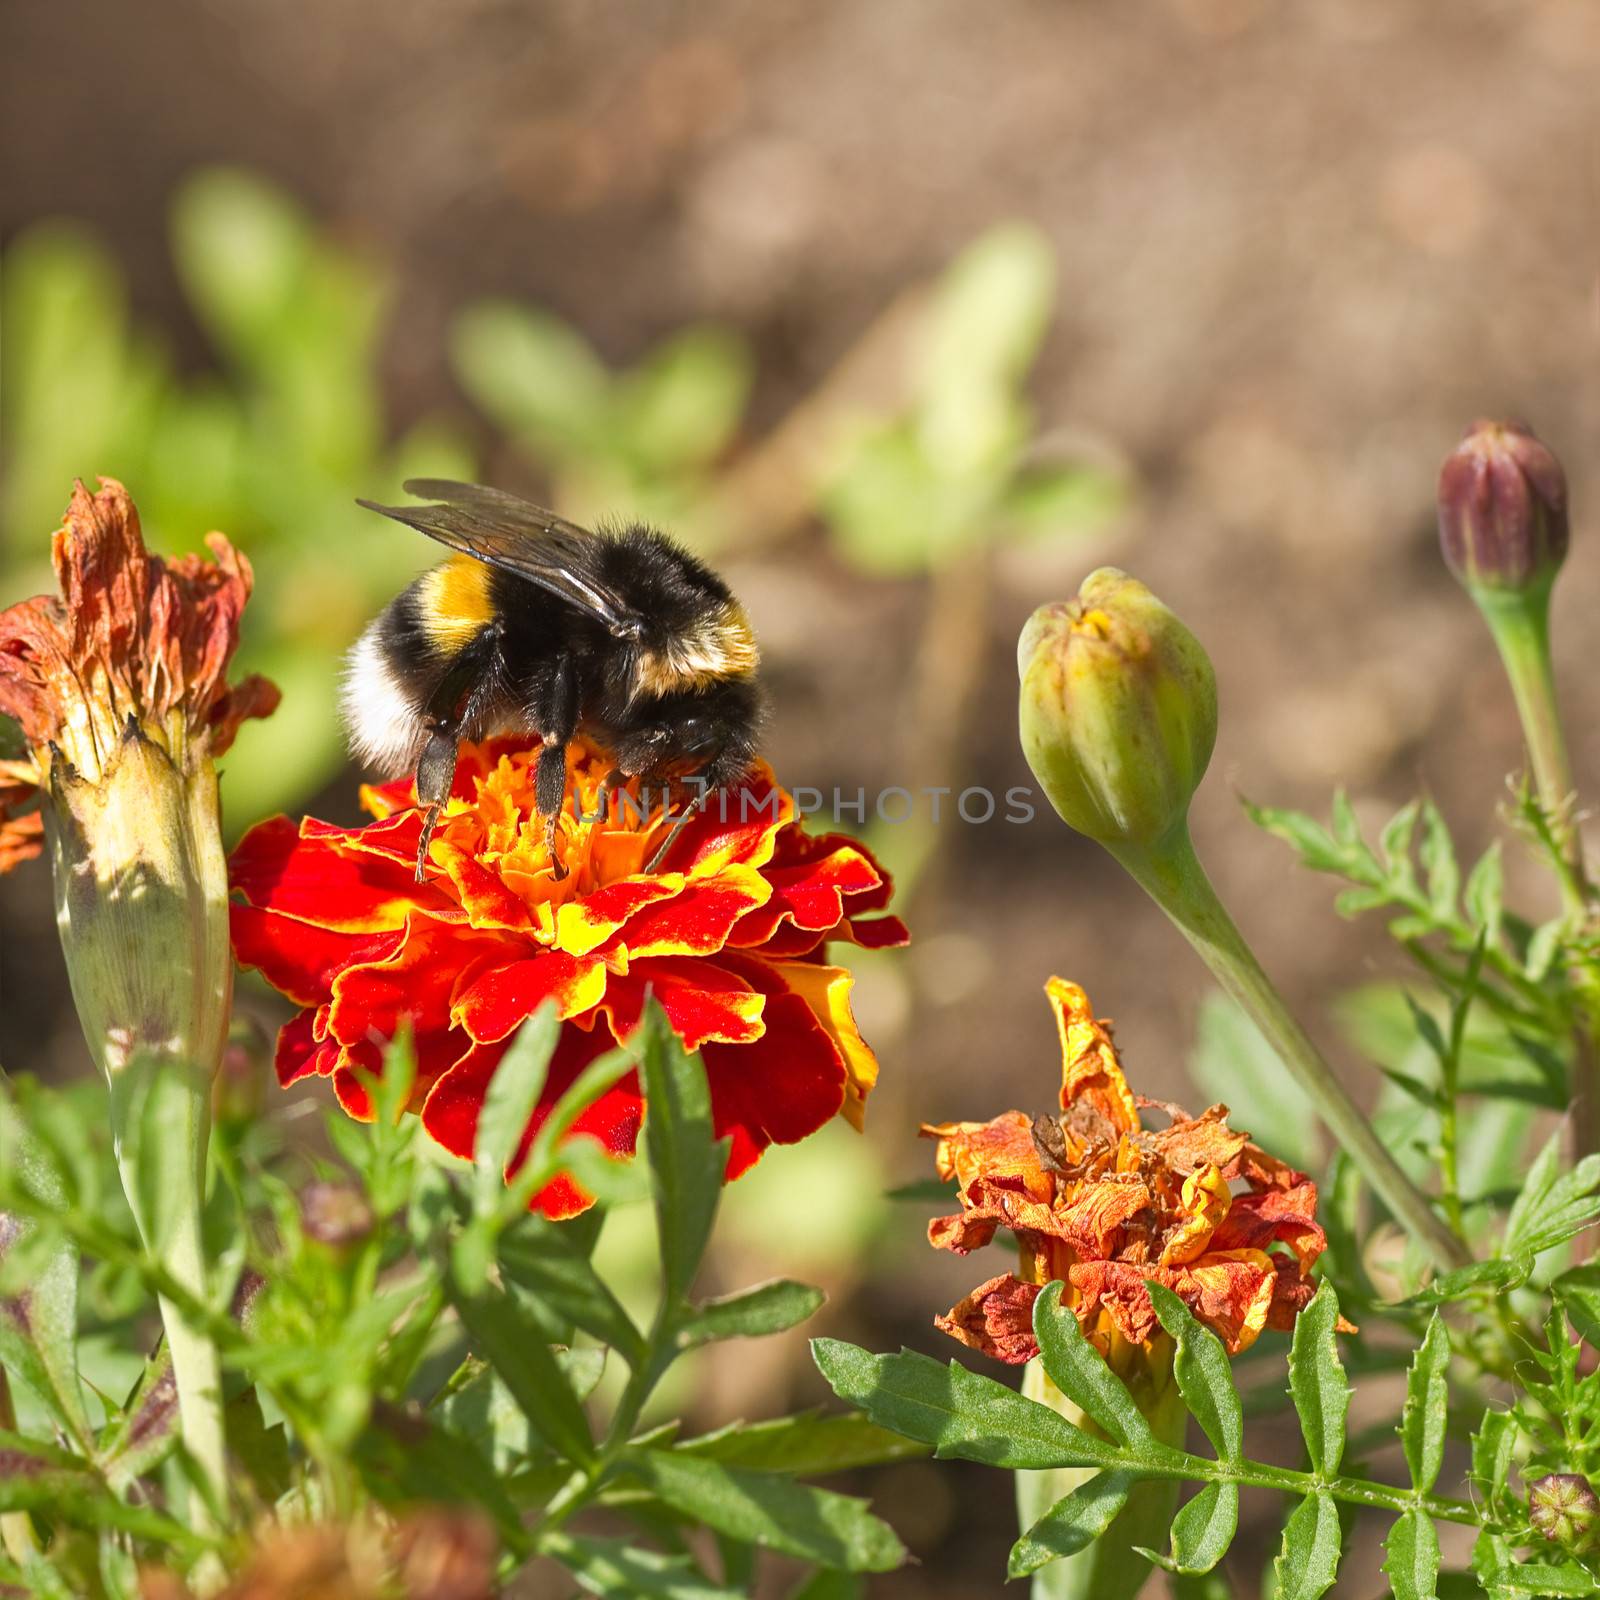 Orange and red French marigold or Tagetes patula with bumble bee and dried flowers in summer - square